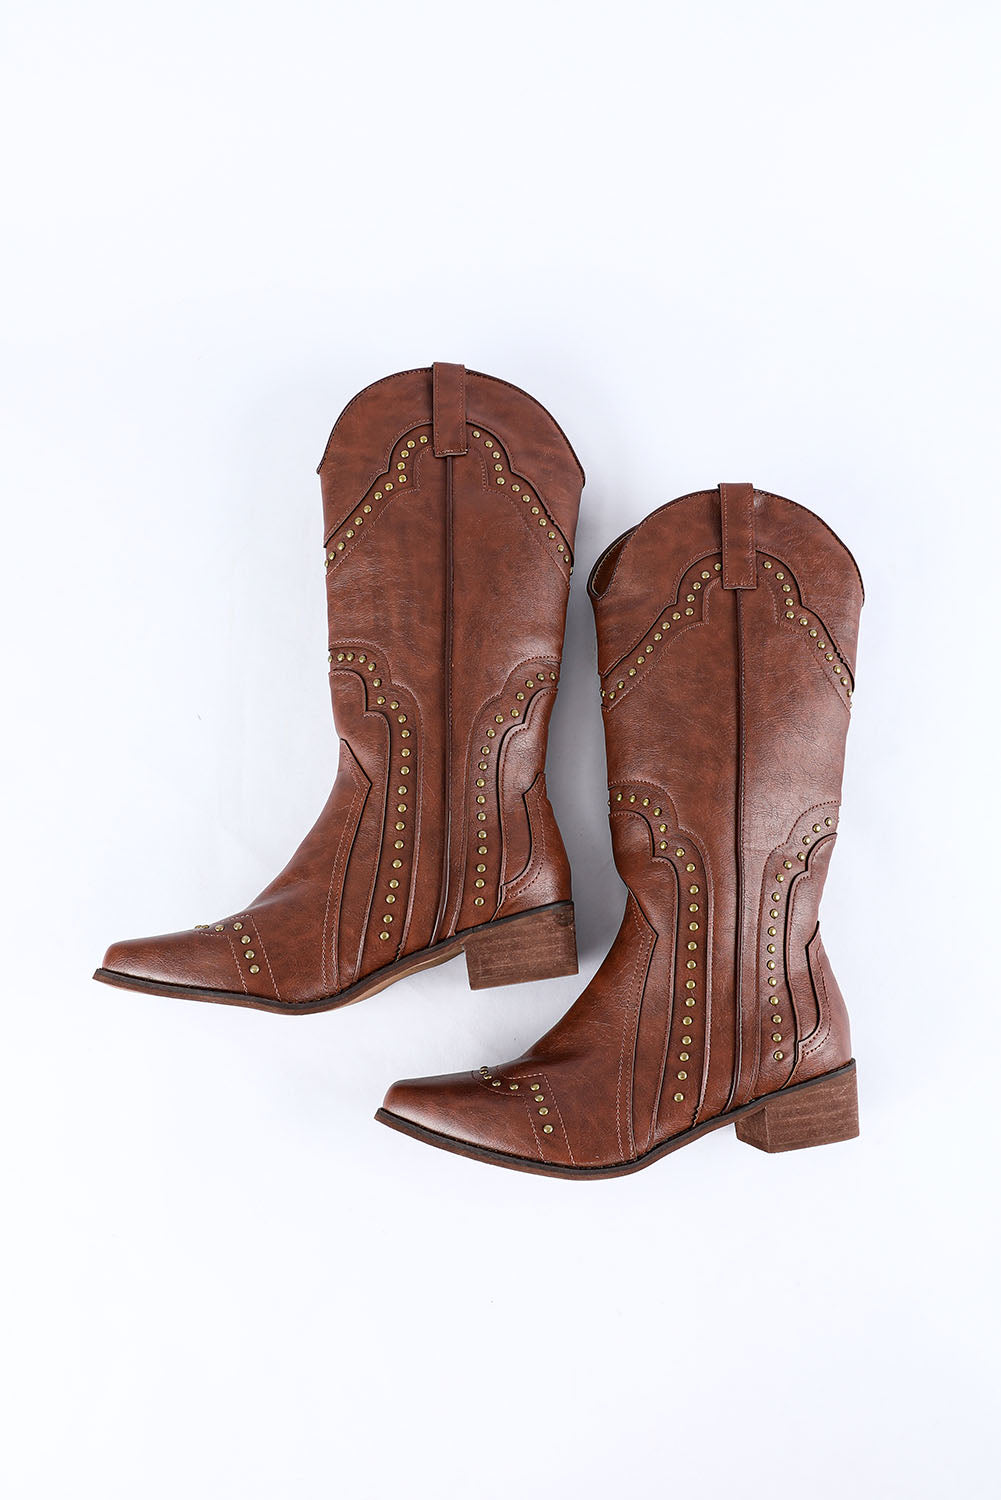 Brown Vintage Rivet Studded Faux Leather Boots